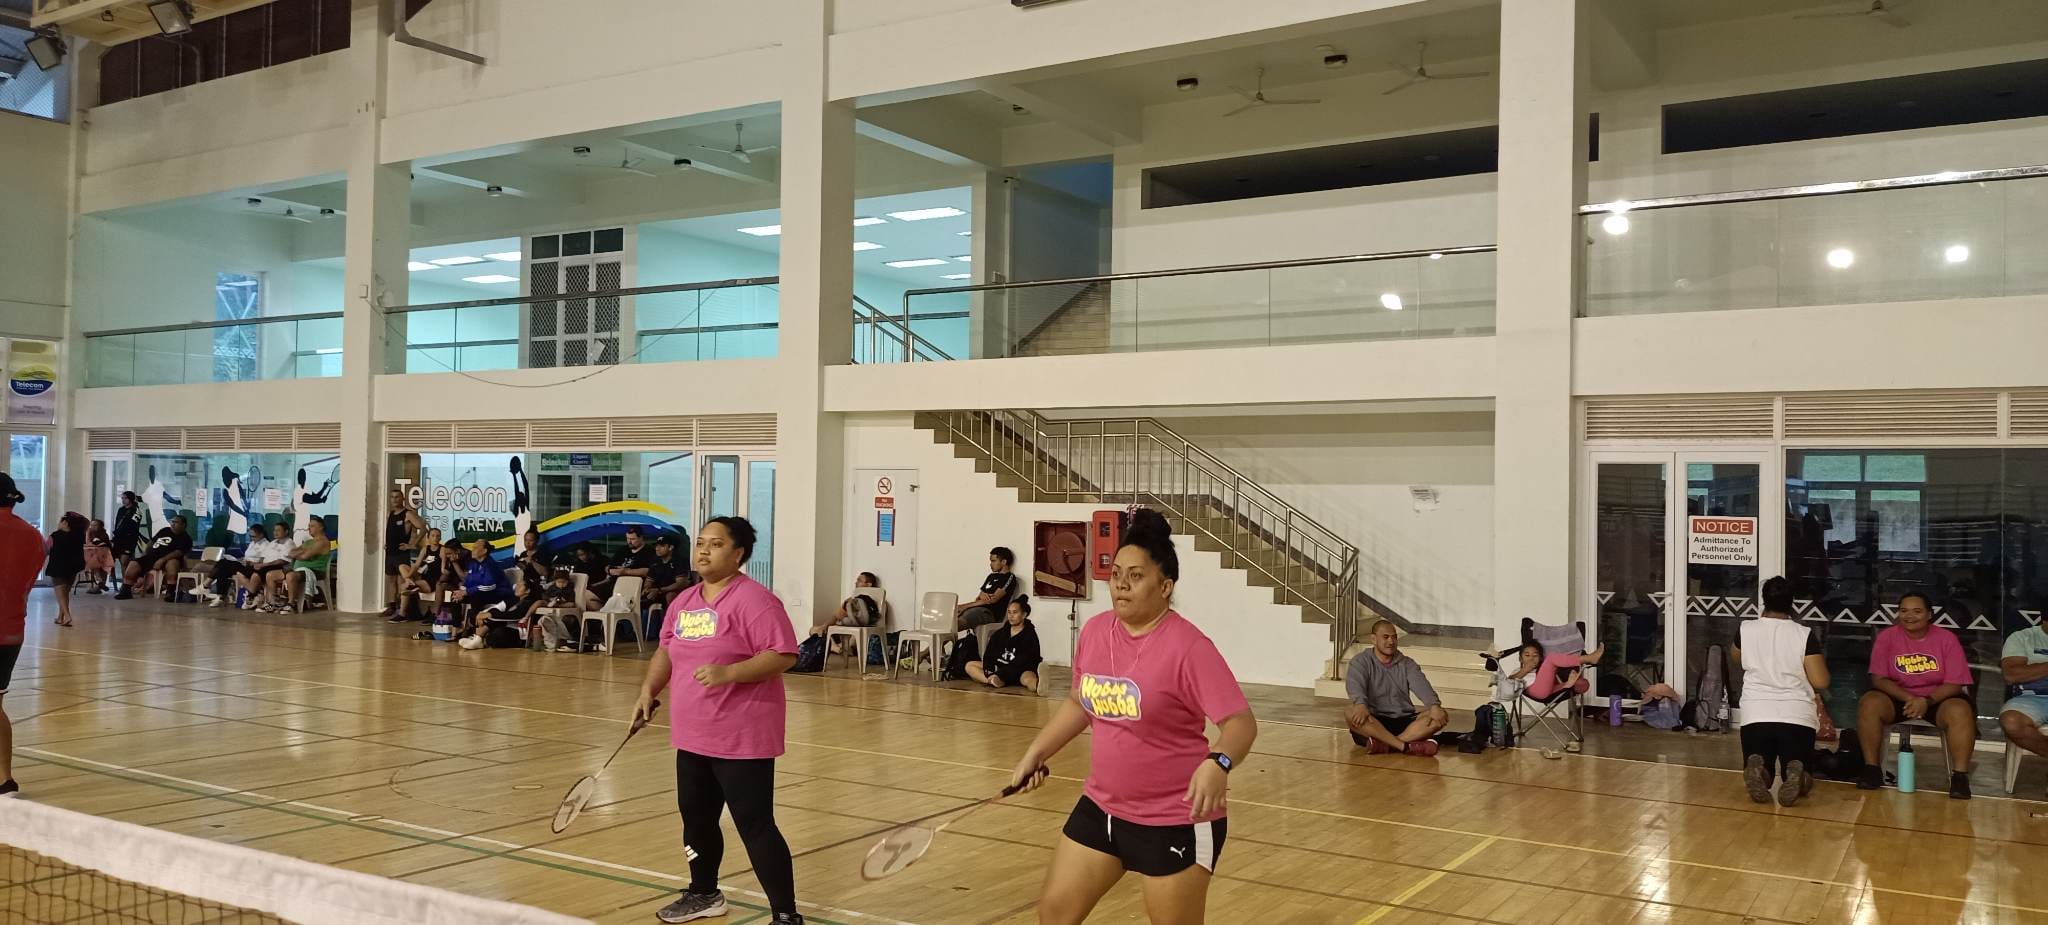 Close to 200 players turn up for Badminton Challenge